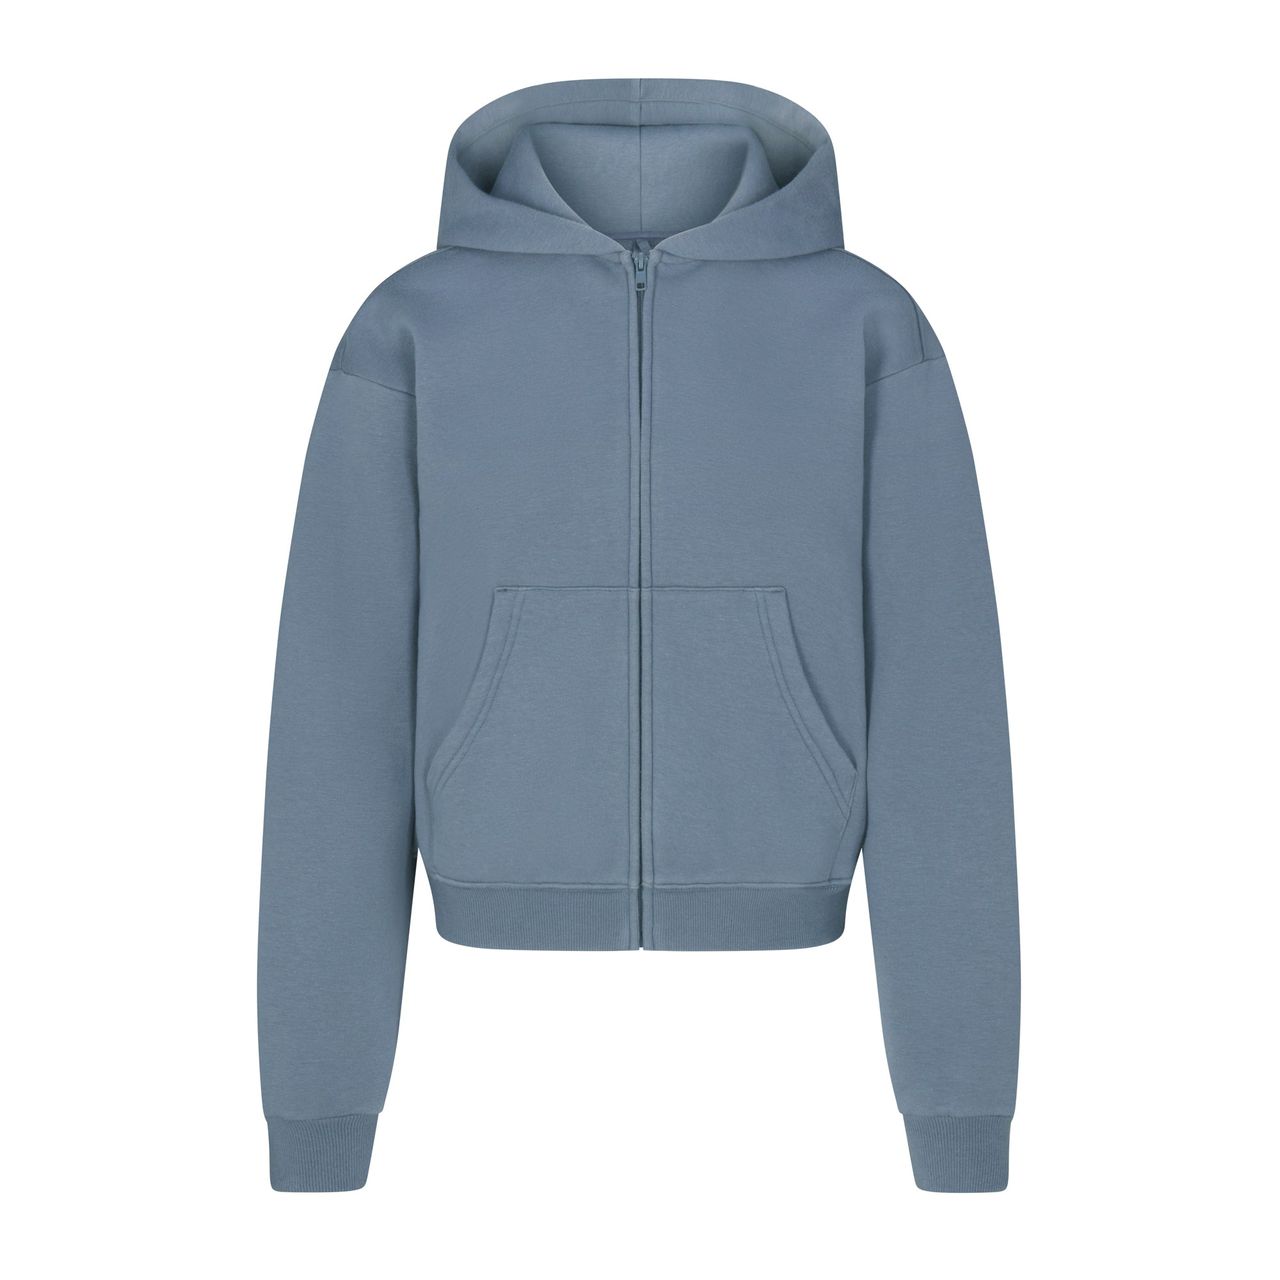 The 8 Best Hoodies for Women That Make Any Outfit Look Cool | Who What Wear